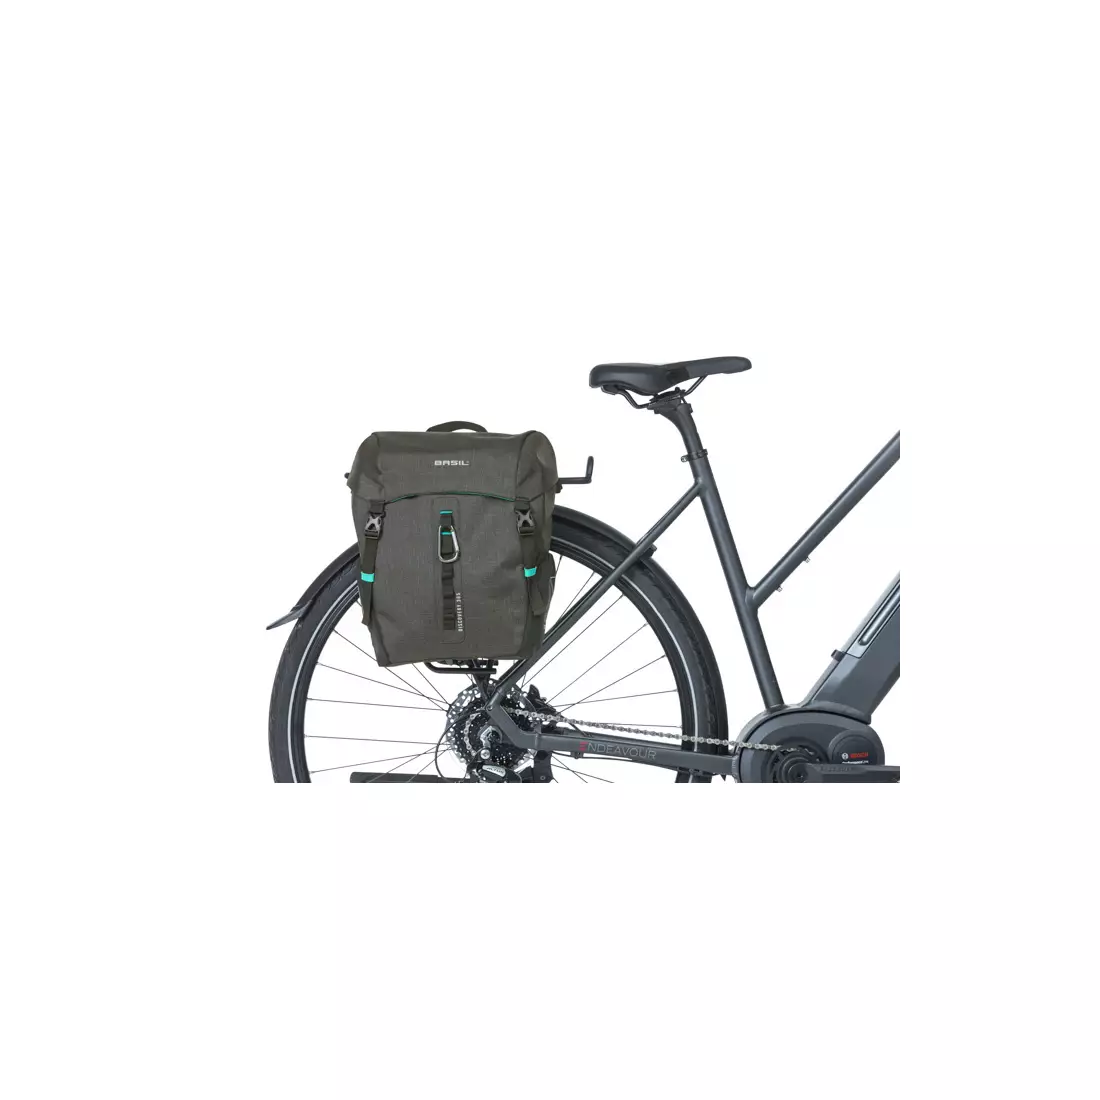 BASIL rear bicycle pannier DISCOVERY 365D M 9L black melee BAS-18043